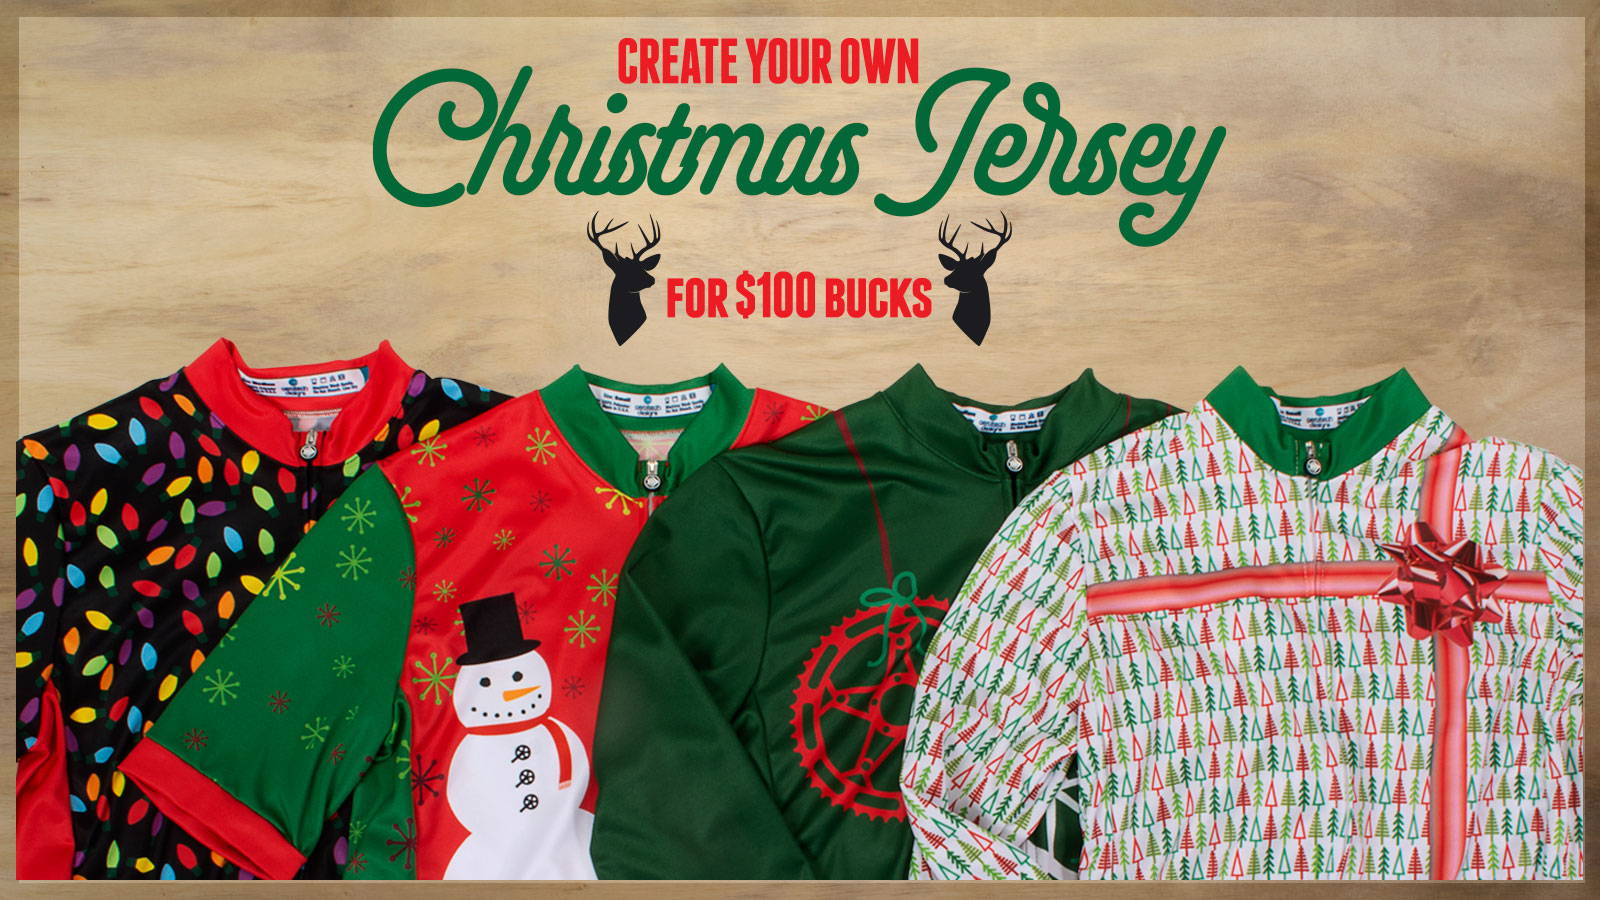 Create your own christmas jersey